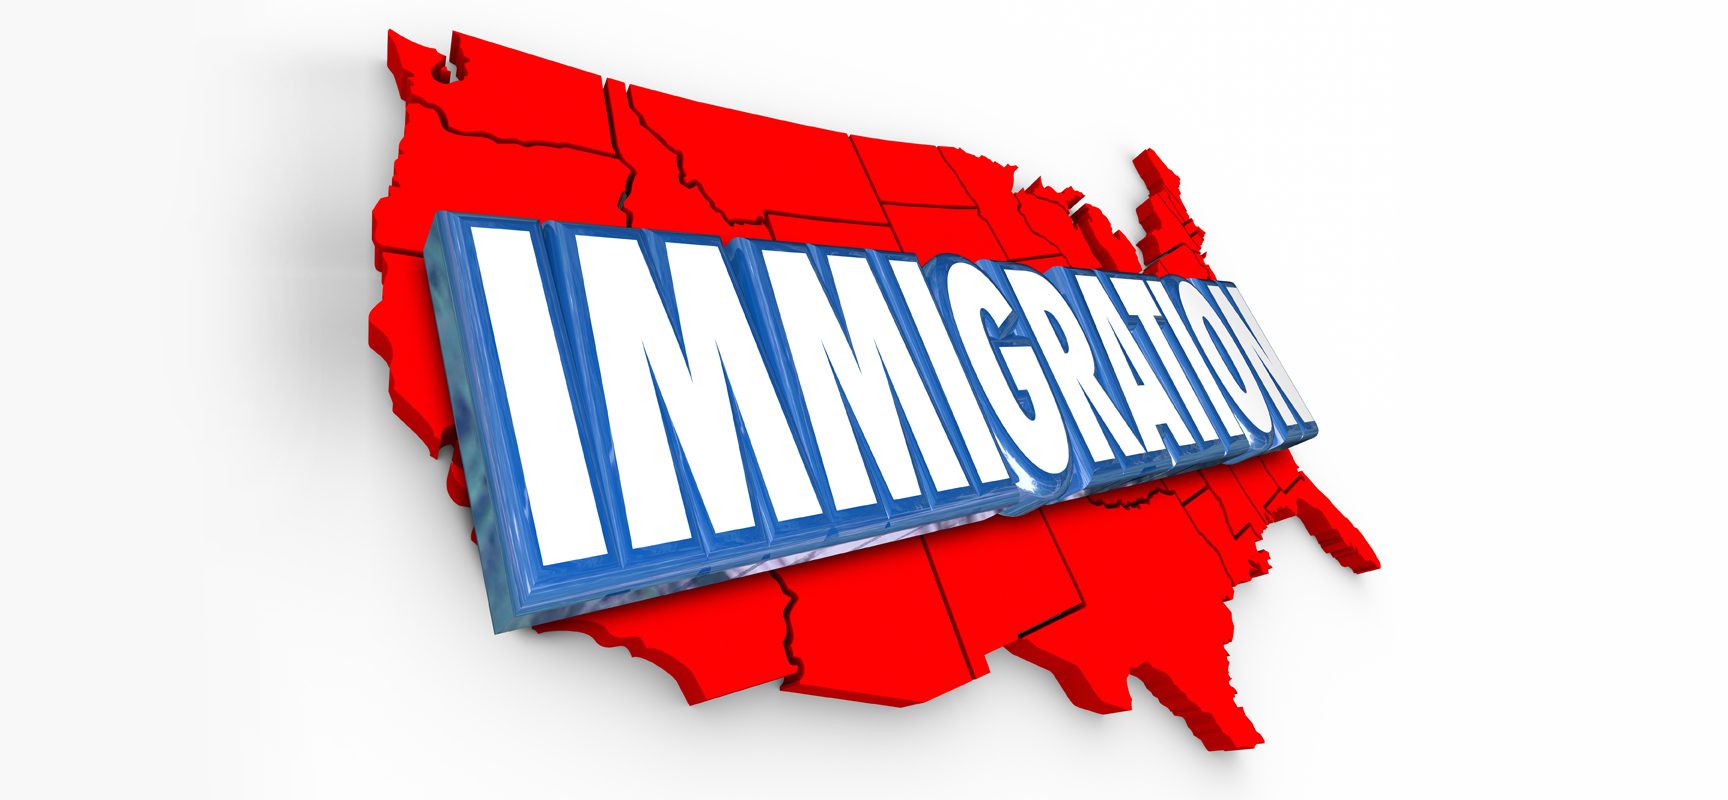 USCIS Policy Manual Update: No Need to Wait for Immigration Judge to Affirm USCIS Termination of CLPR Status Before New Adjustment